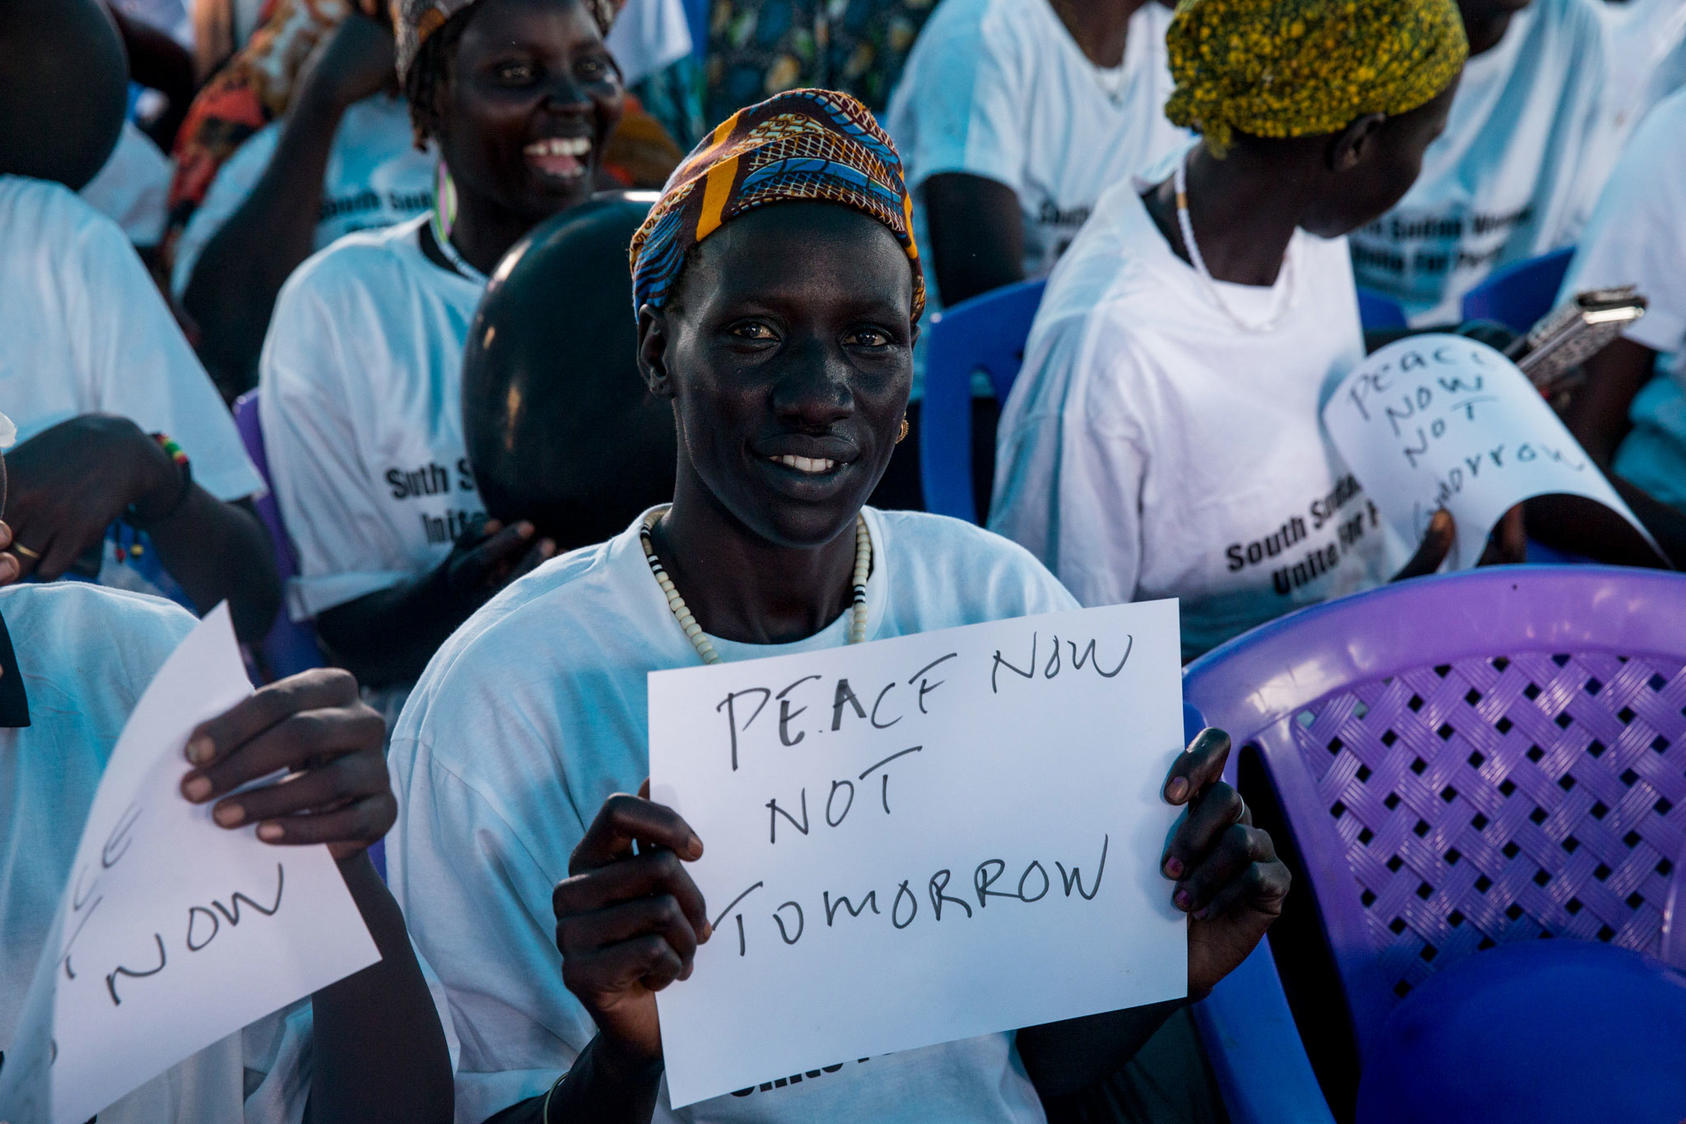 Women at the Protection of Civilians site in Juba call for peace